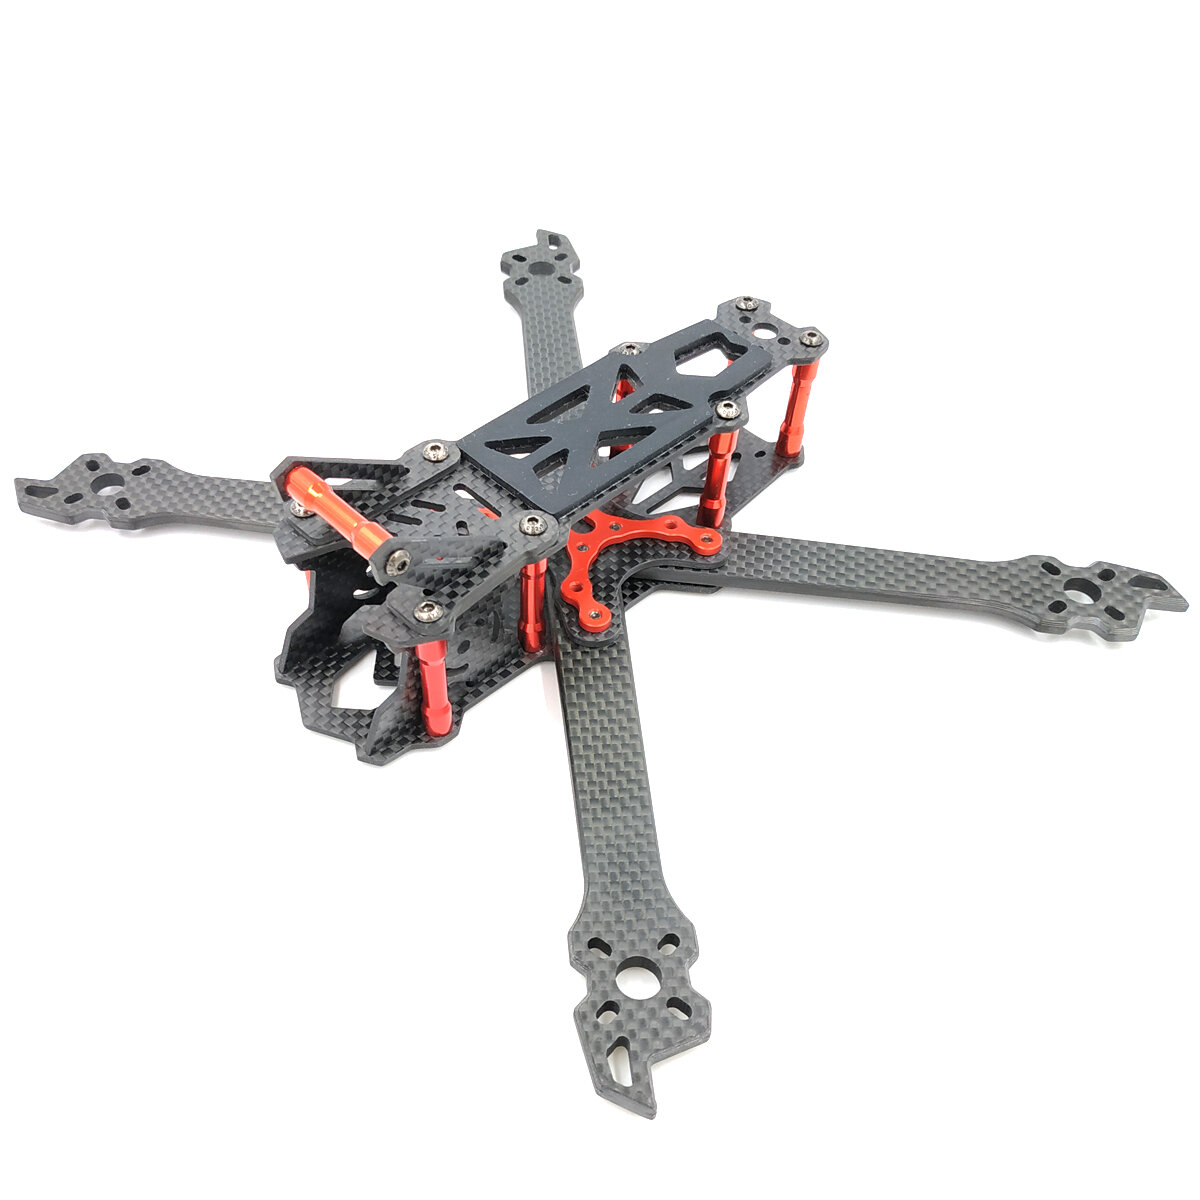 AlfaRC Vechter 230mm 260mm 290mm 5/6/7 Inch Carbon FPV Freestyle Stretch X Frame kit voor RC Drone